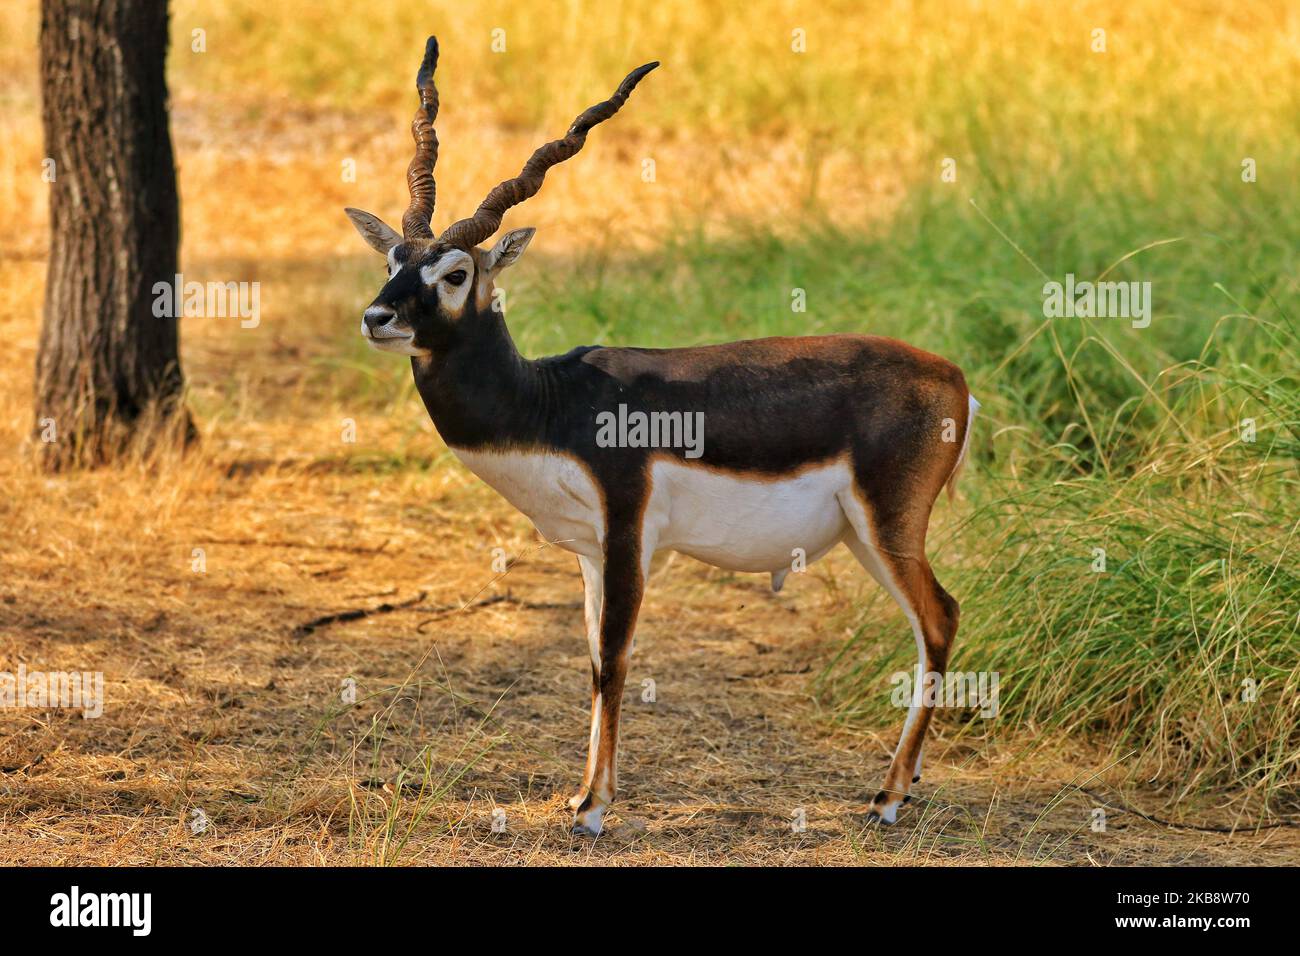 Black buck at Tal Chhapar Sanctuary in Churu district of Rajasthan, India, Oct 21,2019.Tal Chhapar Sanctuary it is known for black bucks and is also home to a variety of birds. The sanctuary is 210 km from Jaipur on the fringe of the Great Indian Desert and situated on road from Ratangarh to Sujangarh. The Tal Chhapar sanctuary lies in the Sujangarh Tehsil of Churu District.(Photo By Vishal Bhatnagar/NurPhoto) (Photo by Vishal Bhatnagar/NurPhoto) Stock Photo